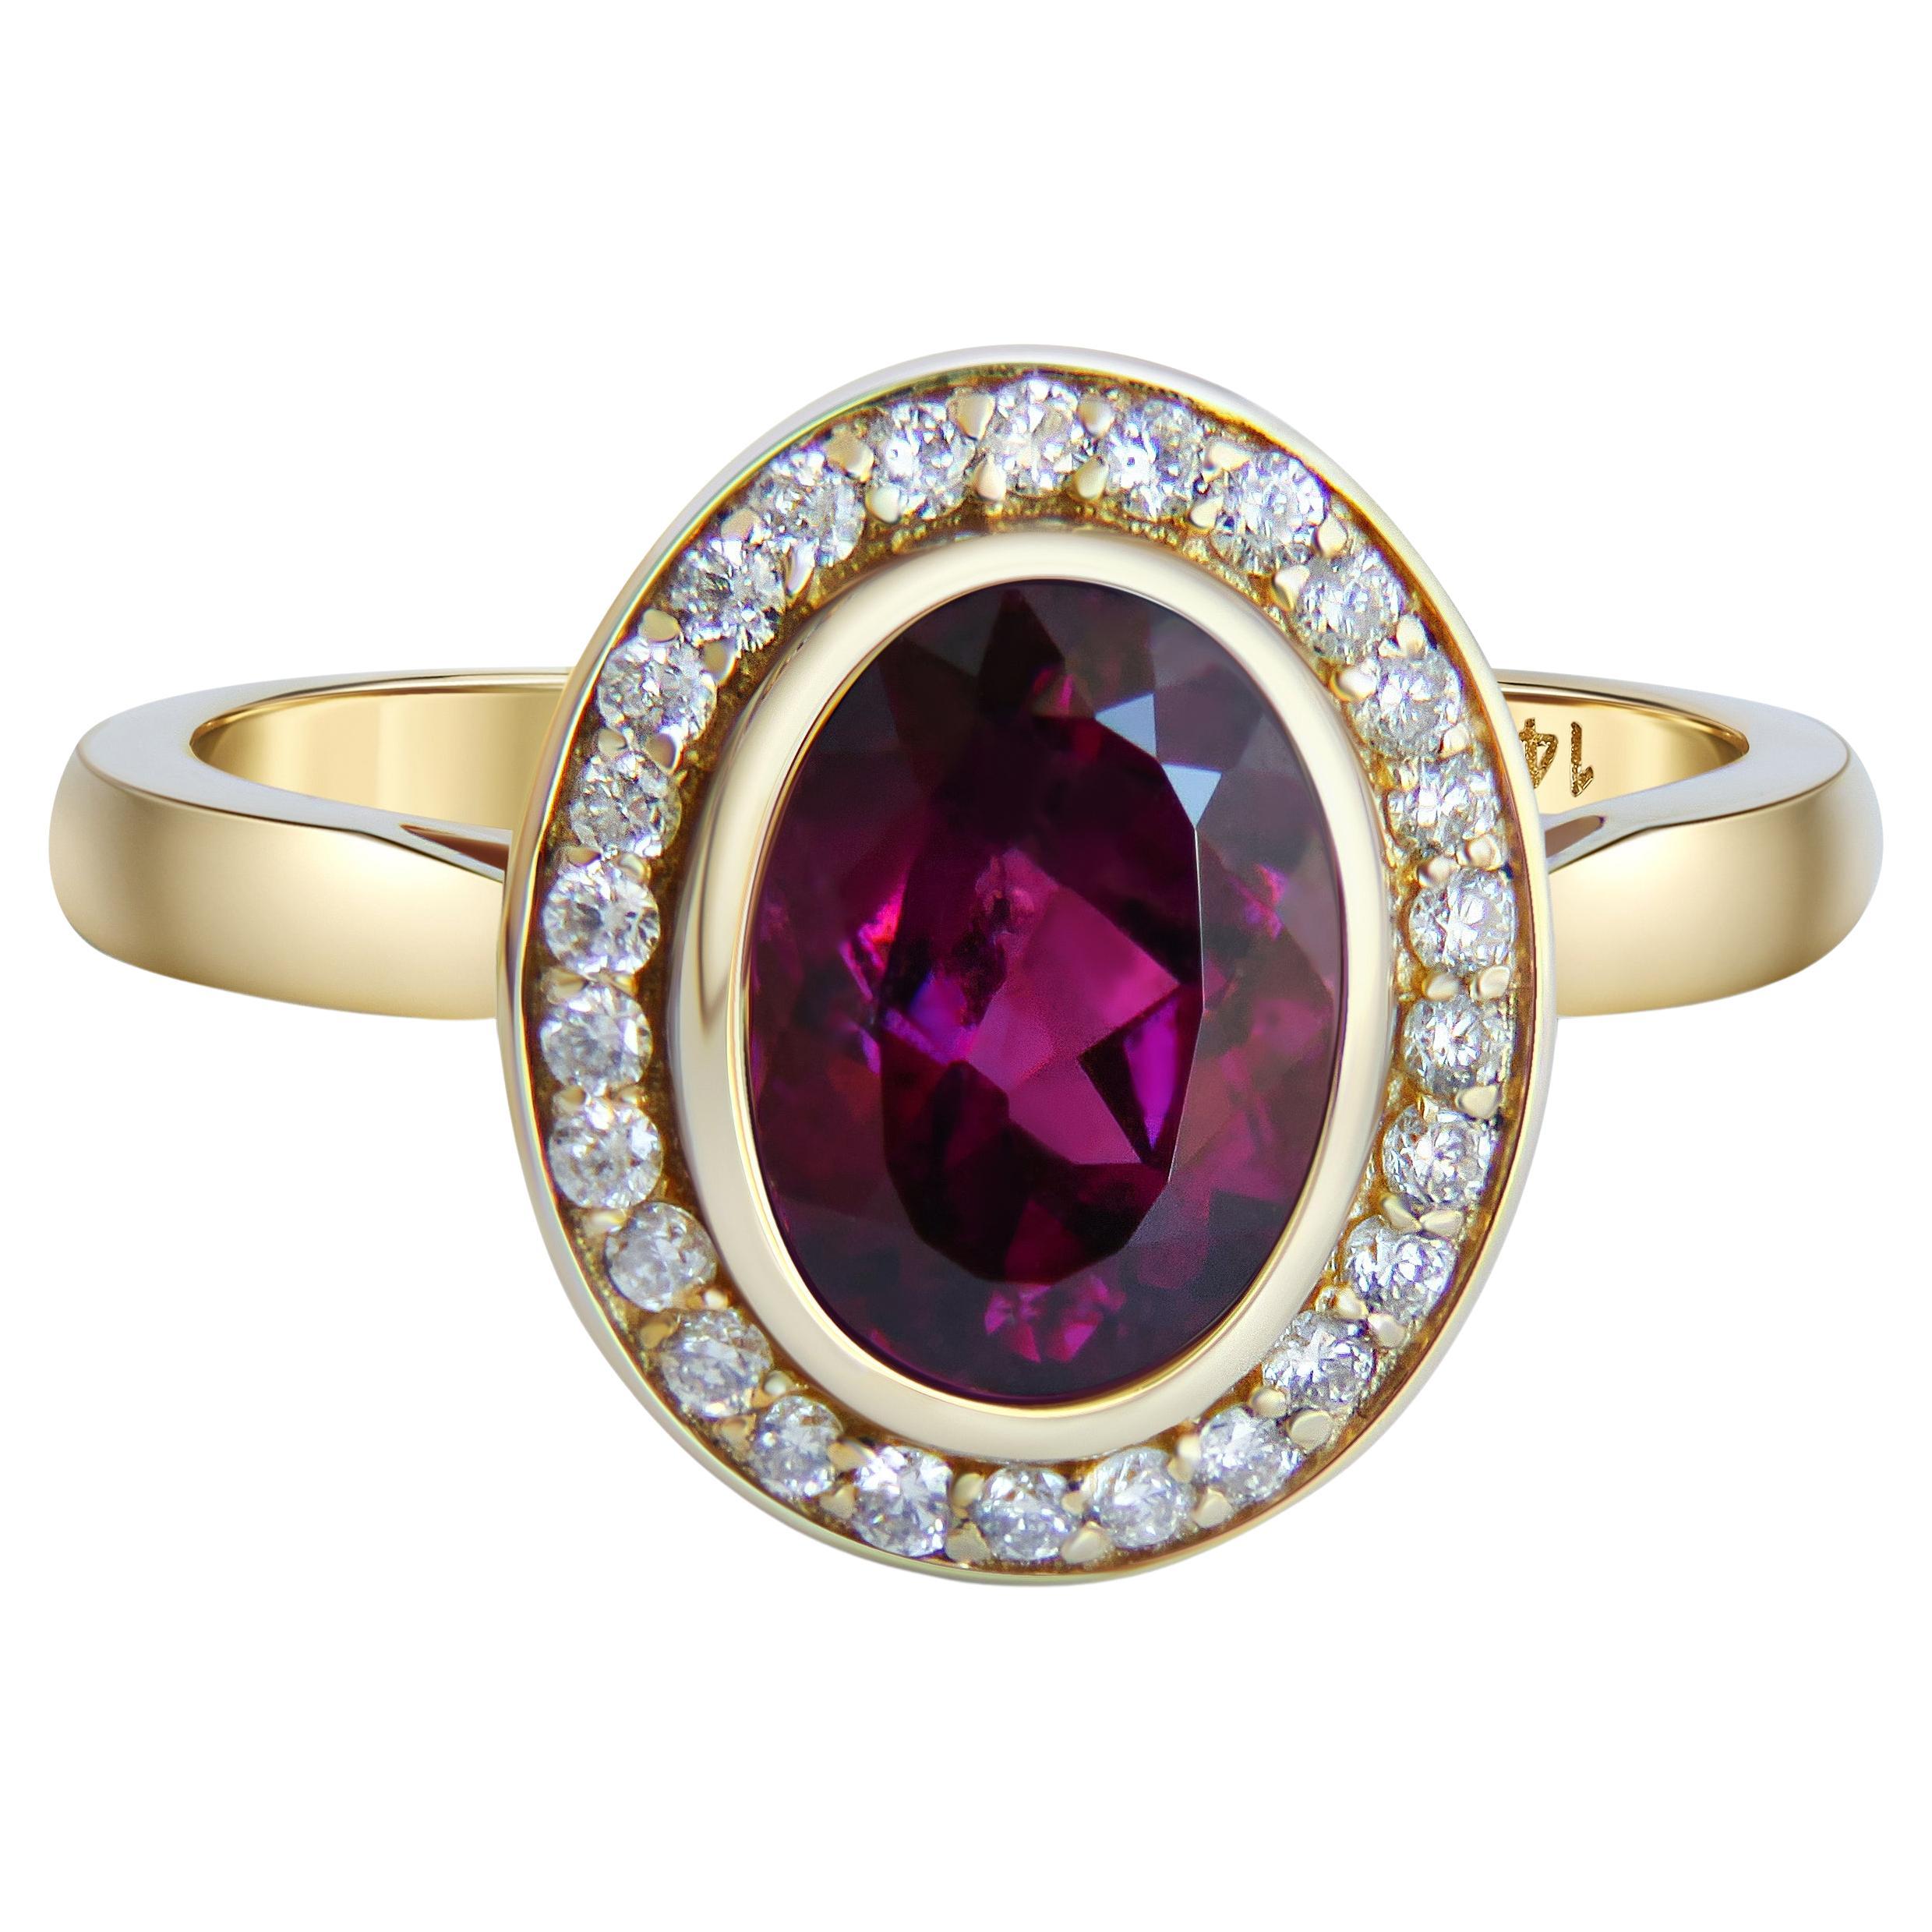 For Sale:  Garnet and diamonds 14k gold ring.